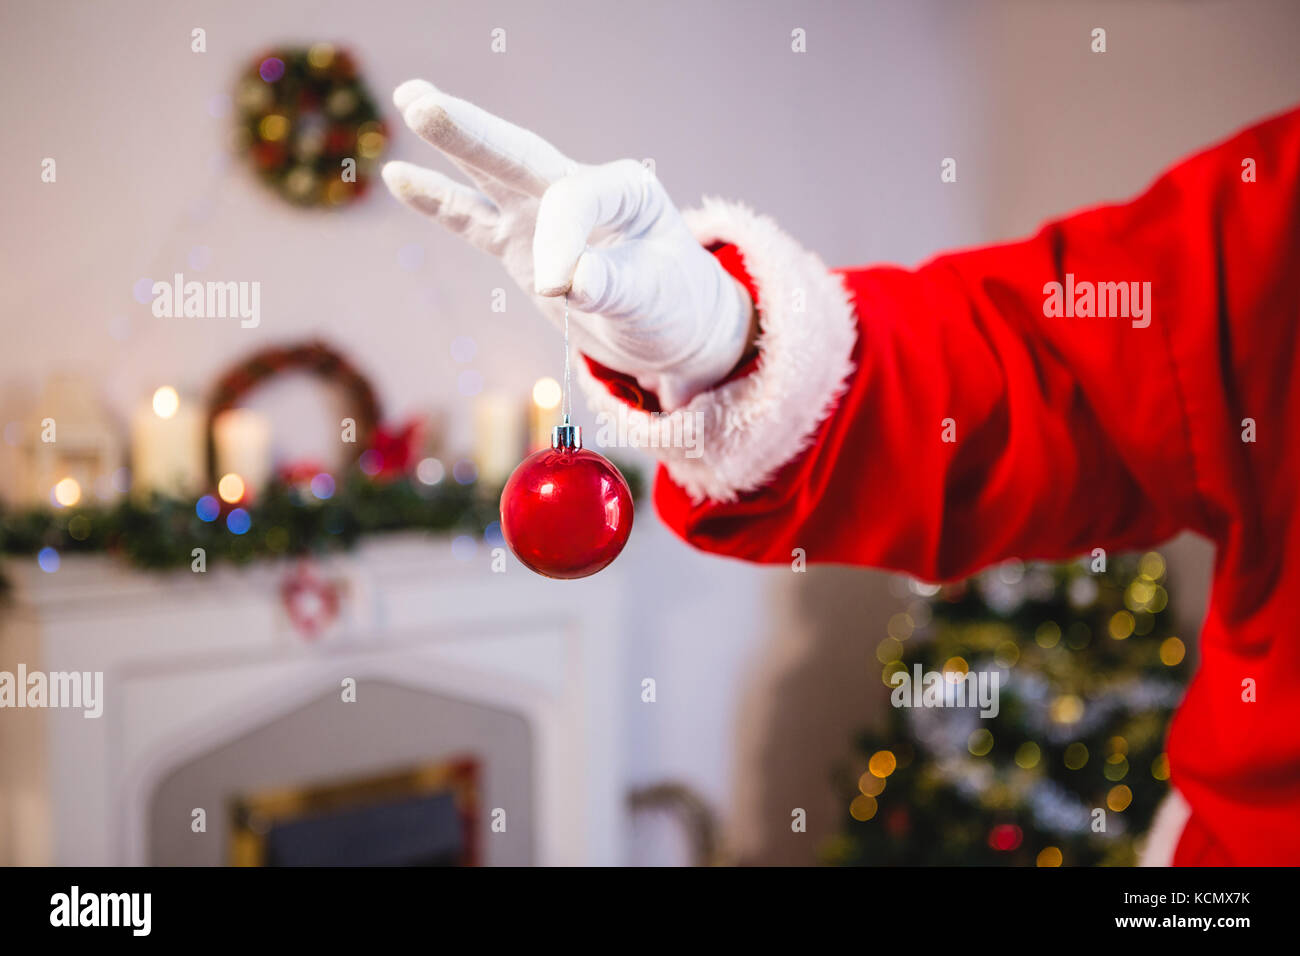 Mid-section of santa claus holding a bauble Stock Photo